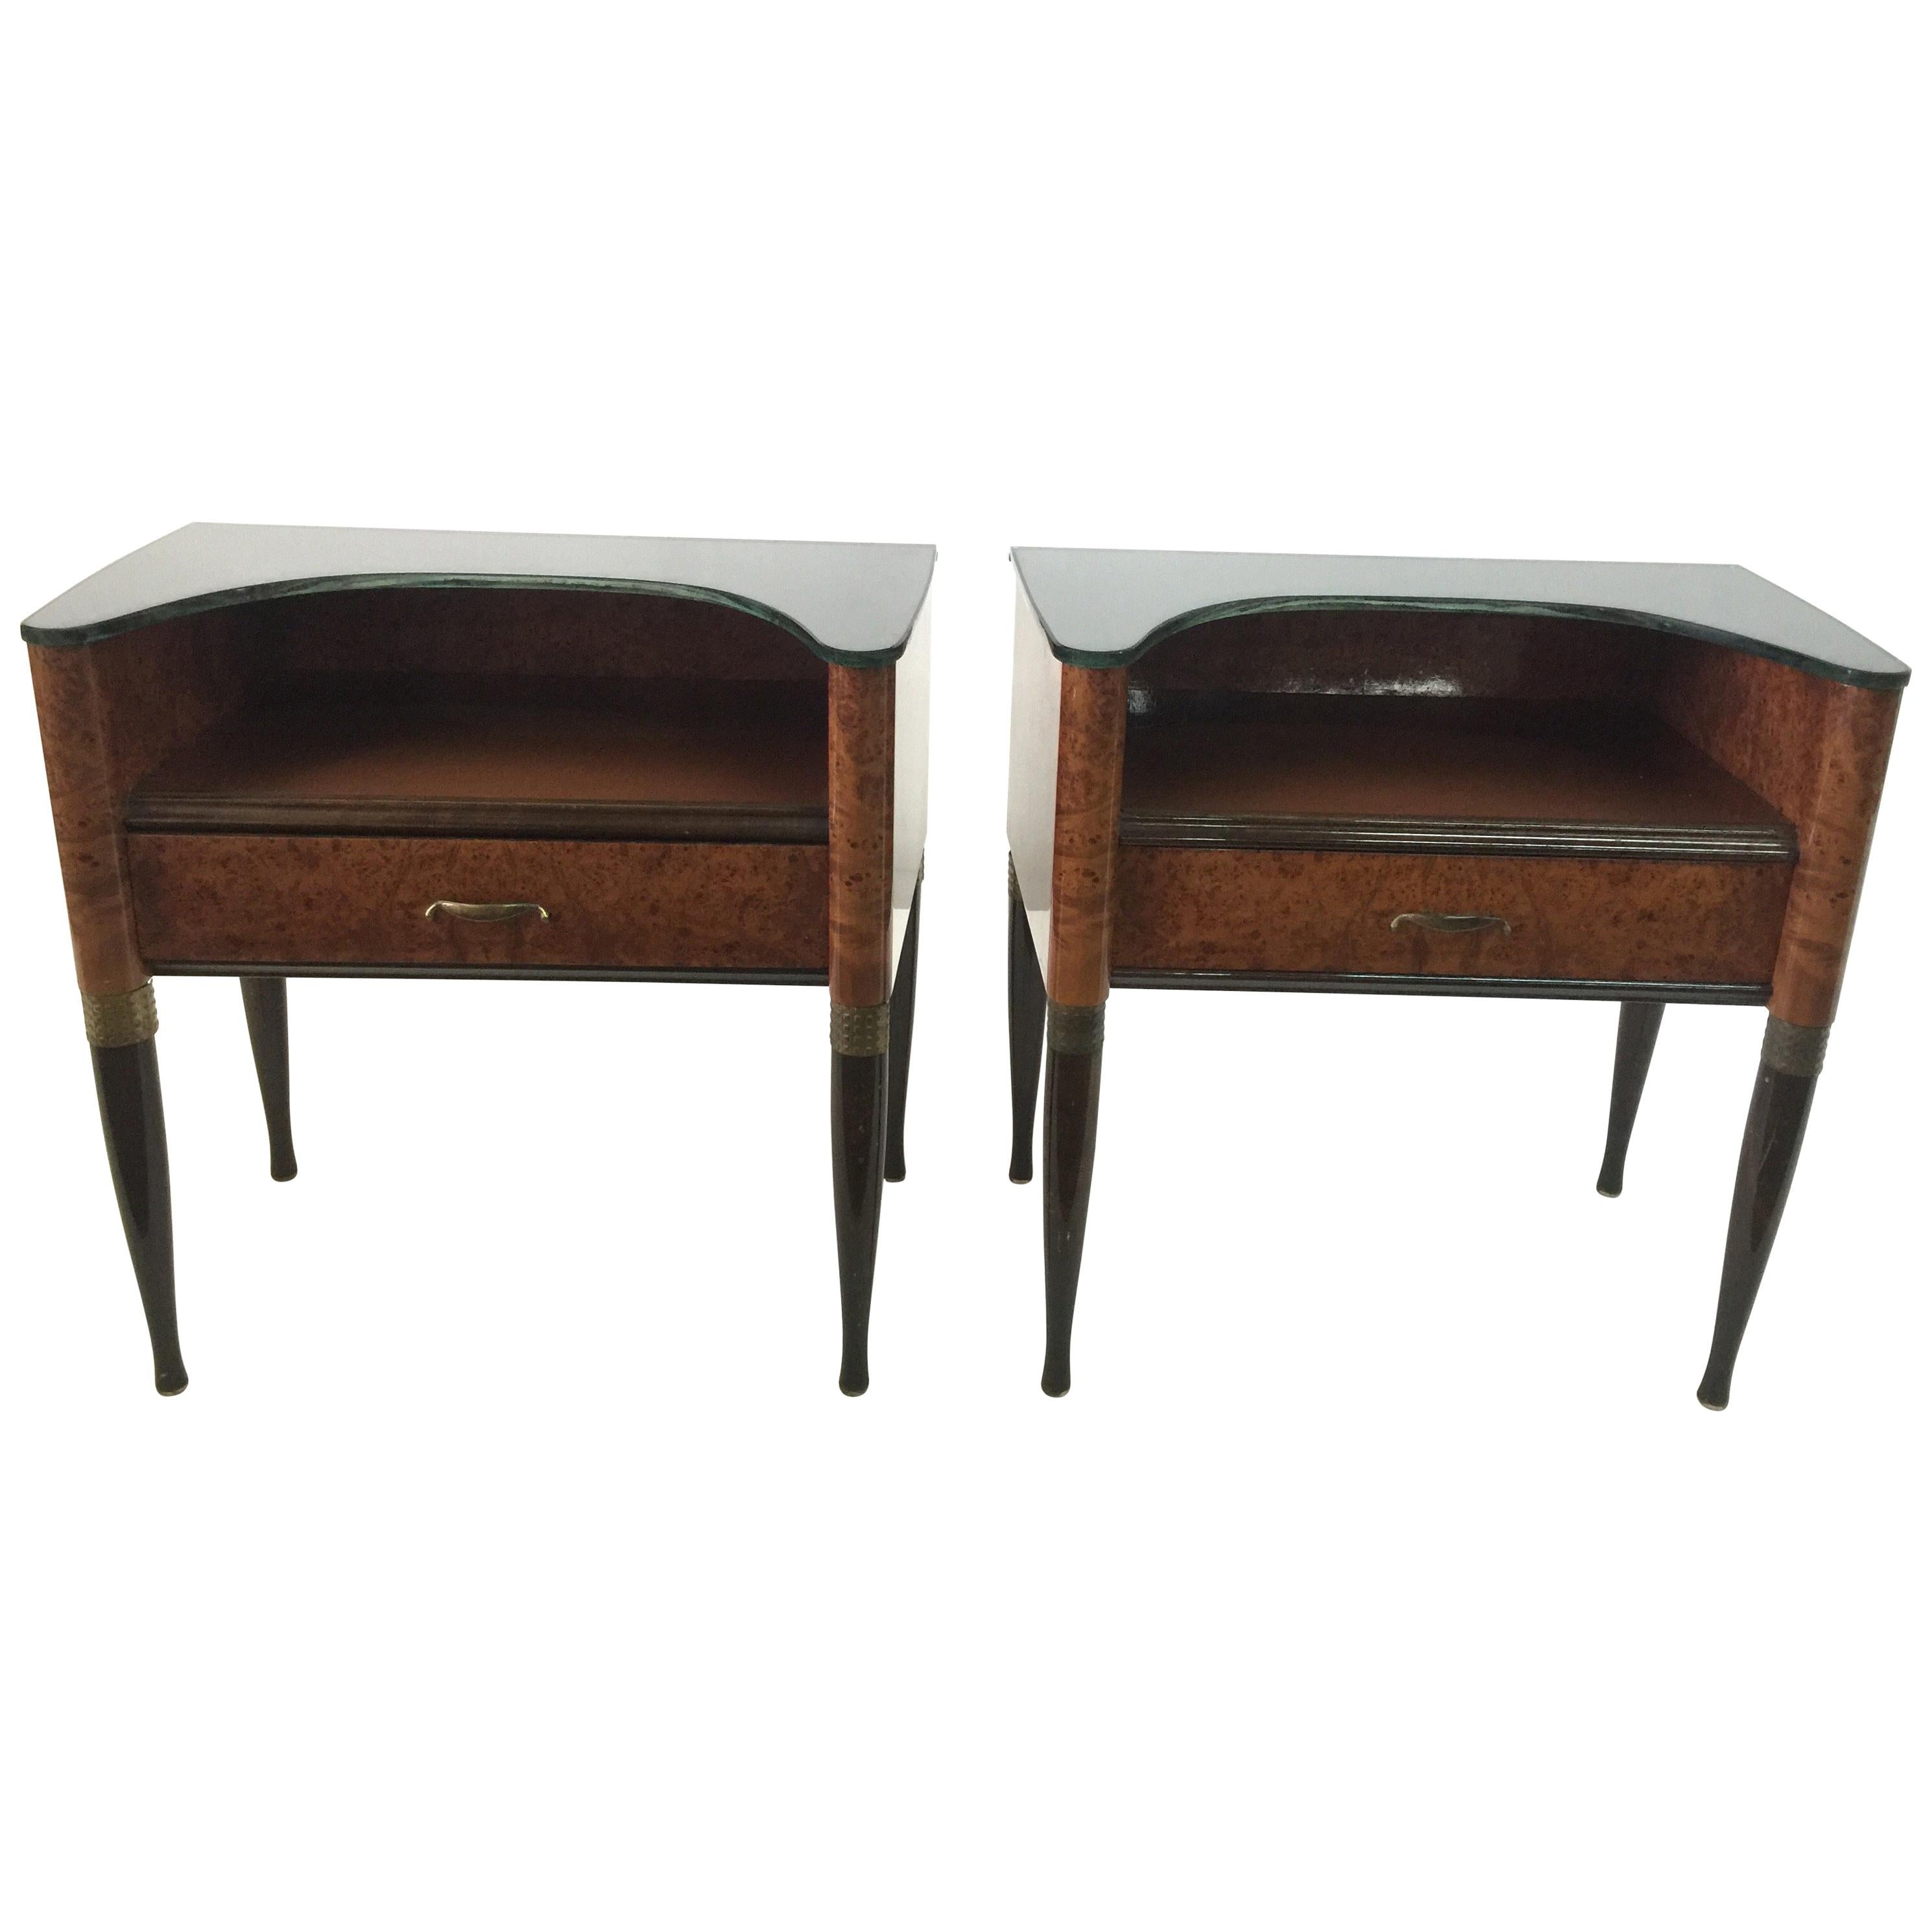 Pair of Exquisite and Rare Italian Deco Nightstands or Sidetables  For Sale